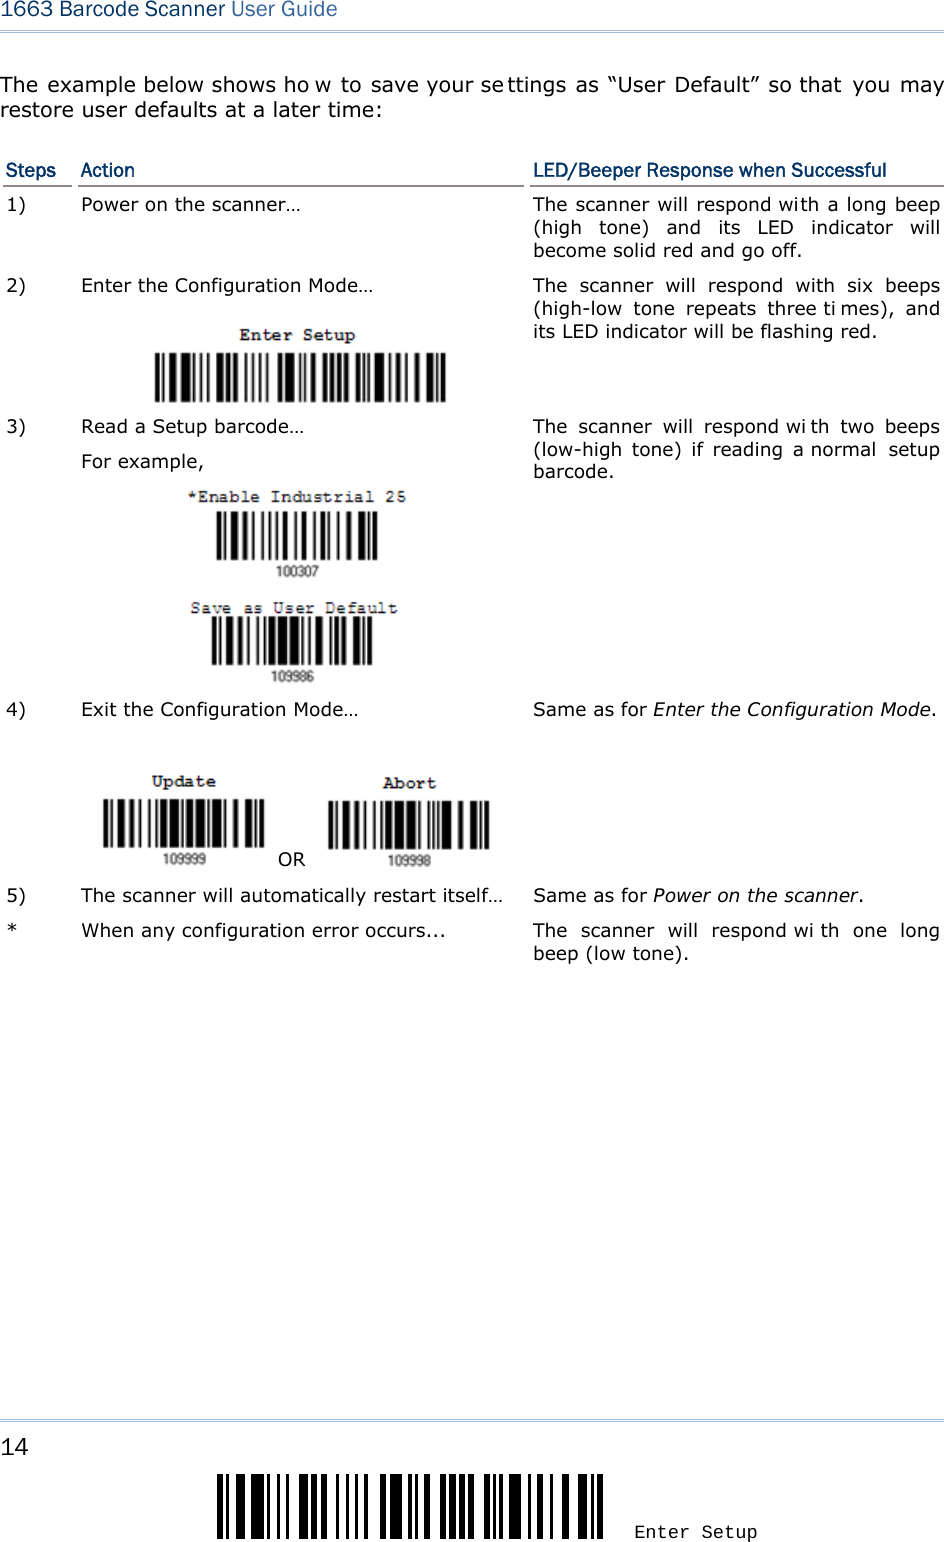 14 Enter Setup 1663 Barcode Scanner User Guide  The example below shows ho w to save your se ttings as “User Default” so that you may restore user defaults at a later time: Steps  Action  LED/Beeper Response when Successful 1)  Power on the scanner… The scanner will respond with a long beep (high tone) and its LED indicator will become solid red and go off. 2)  Enter the Configuration Mode…   The scanner will respond with six beeps (high-low tone repeats three ti mes), and its LED indicator will be flashing red.  3)  Read a Setup barcode… For example,               The scanner will respond wi th two beeps (low-high tone) if reading a normal  setup barcode. 4)  Exit the Configuration Mode…      OR    Same as for Enter the Configuration Mode. 5)  The scanner will automatically restart itself…  Same as for Power on the scanner. *  When any configuration error occurs... The scanner will respond wi th one long beep (low tone).   